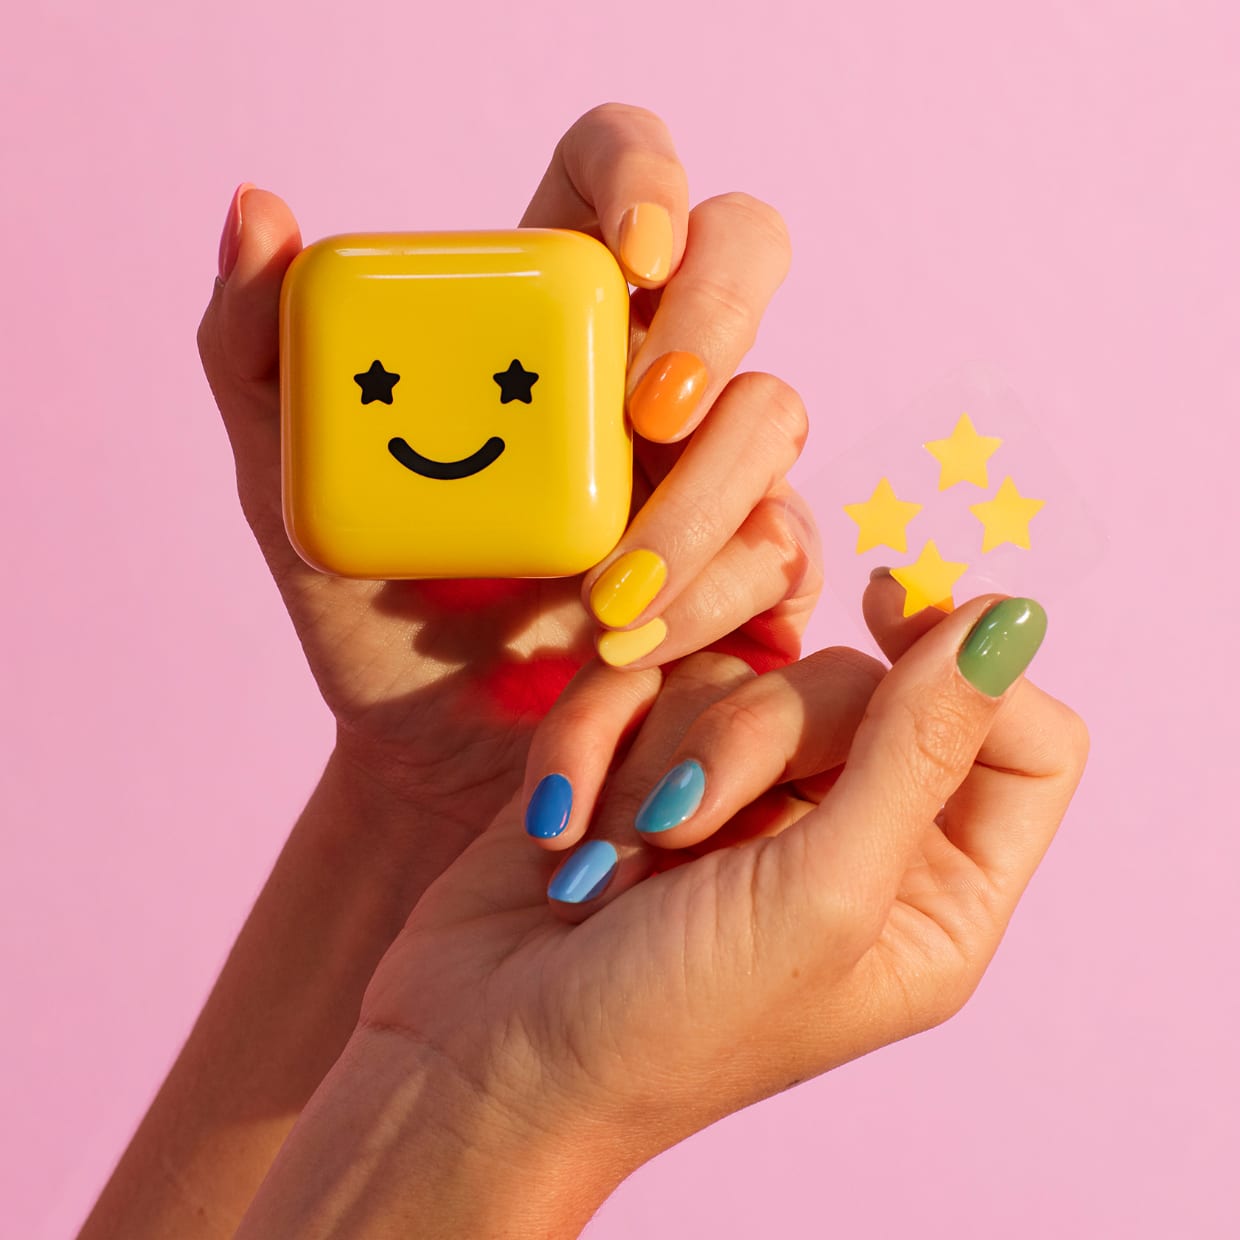 A pair of hands holding a yellow case with a happy face and a sheet of yellow star patches.